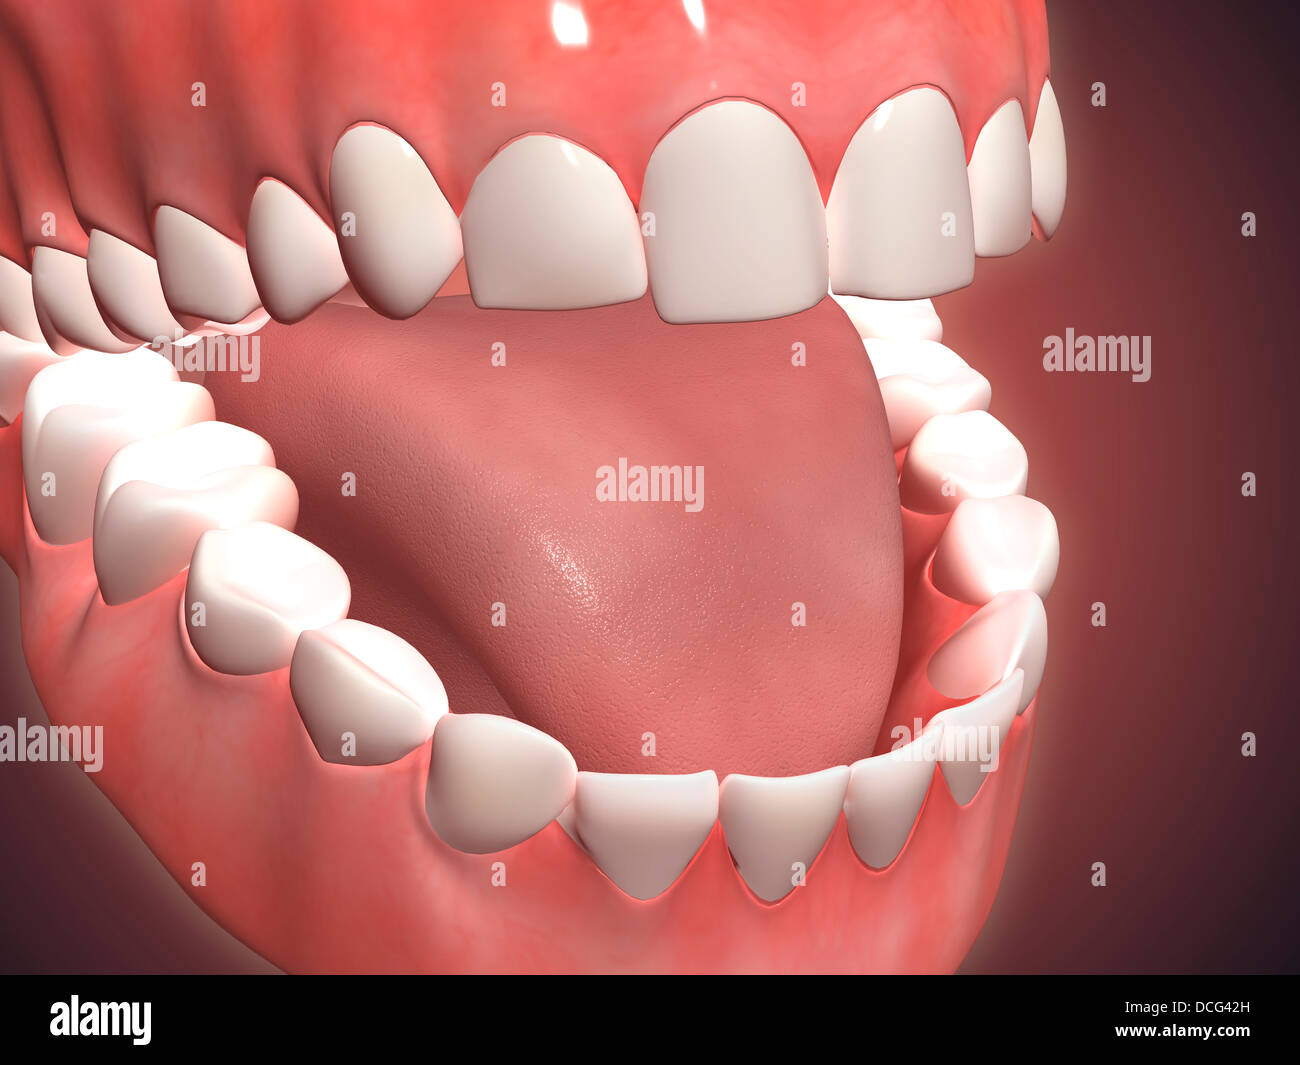 Medical illustration of human mouth open, showing teeth, gums and tongue. Stock Photo